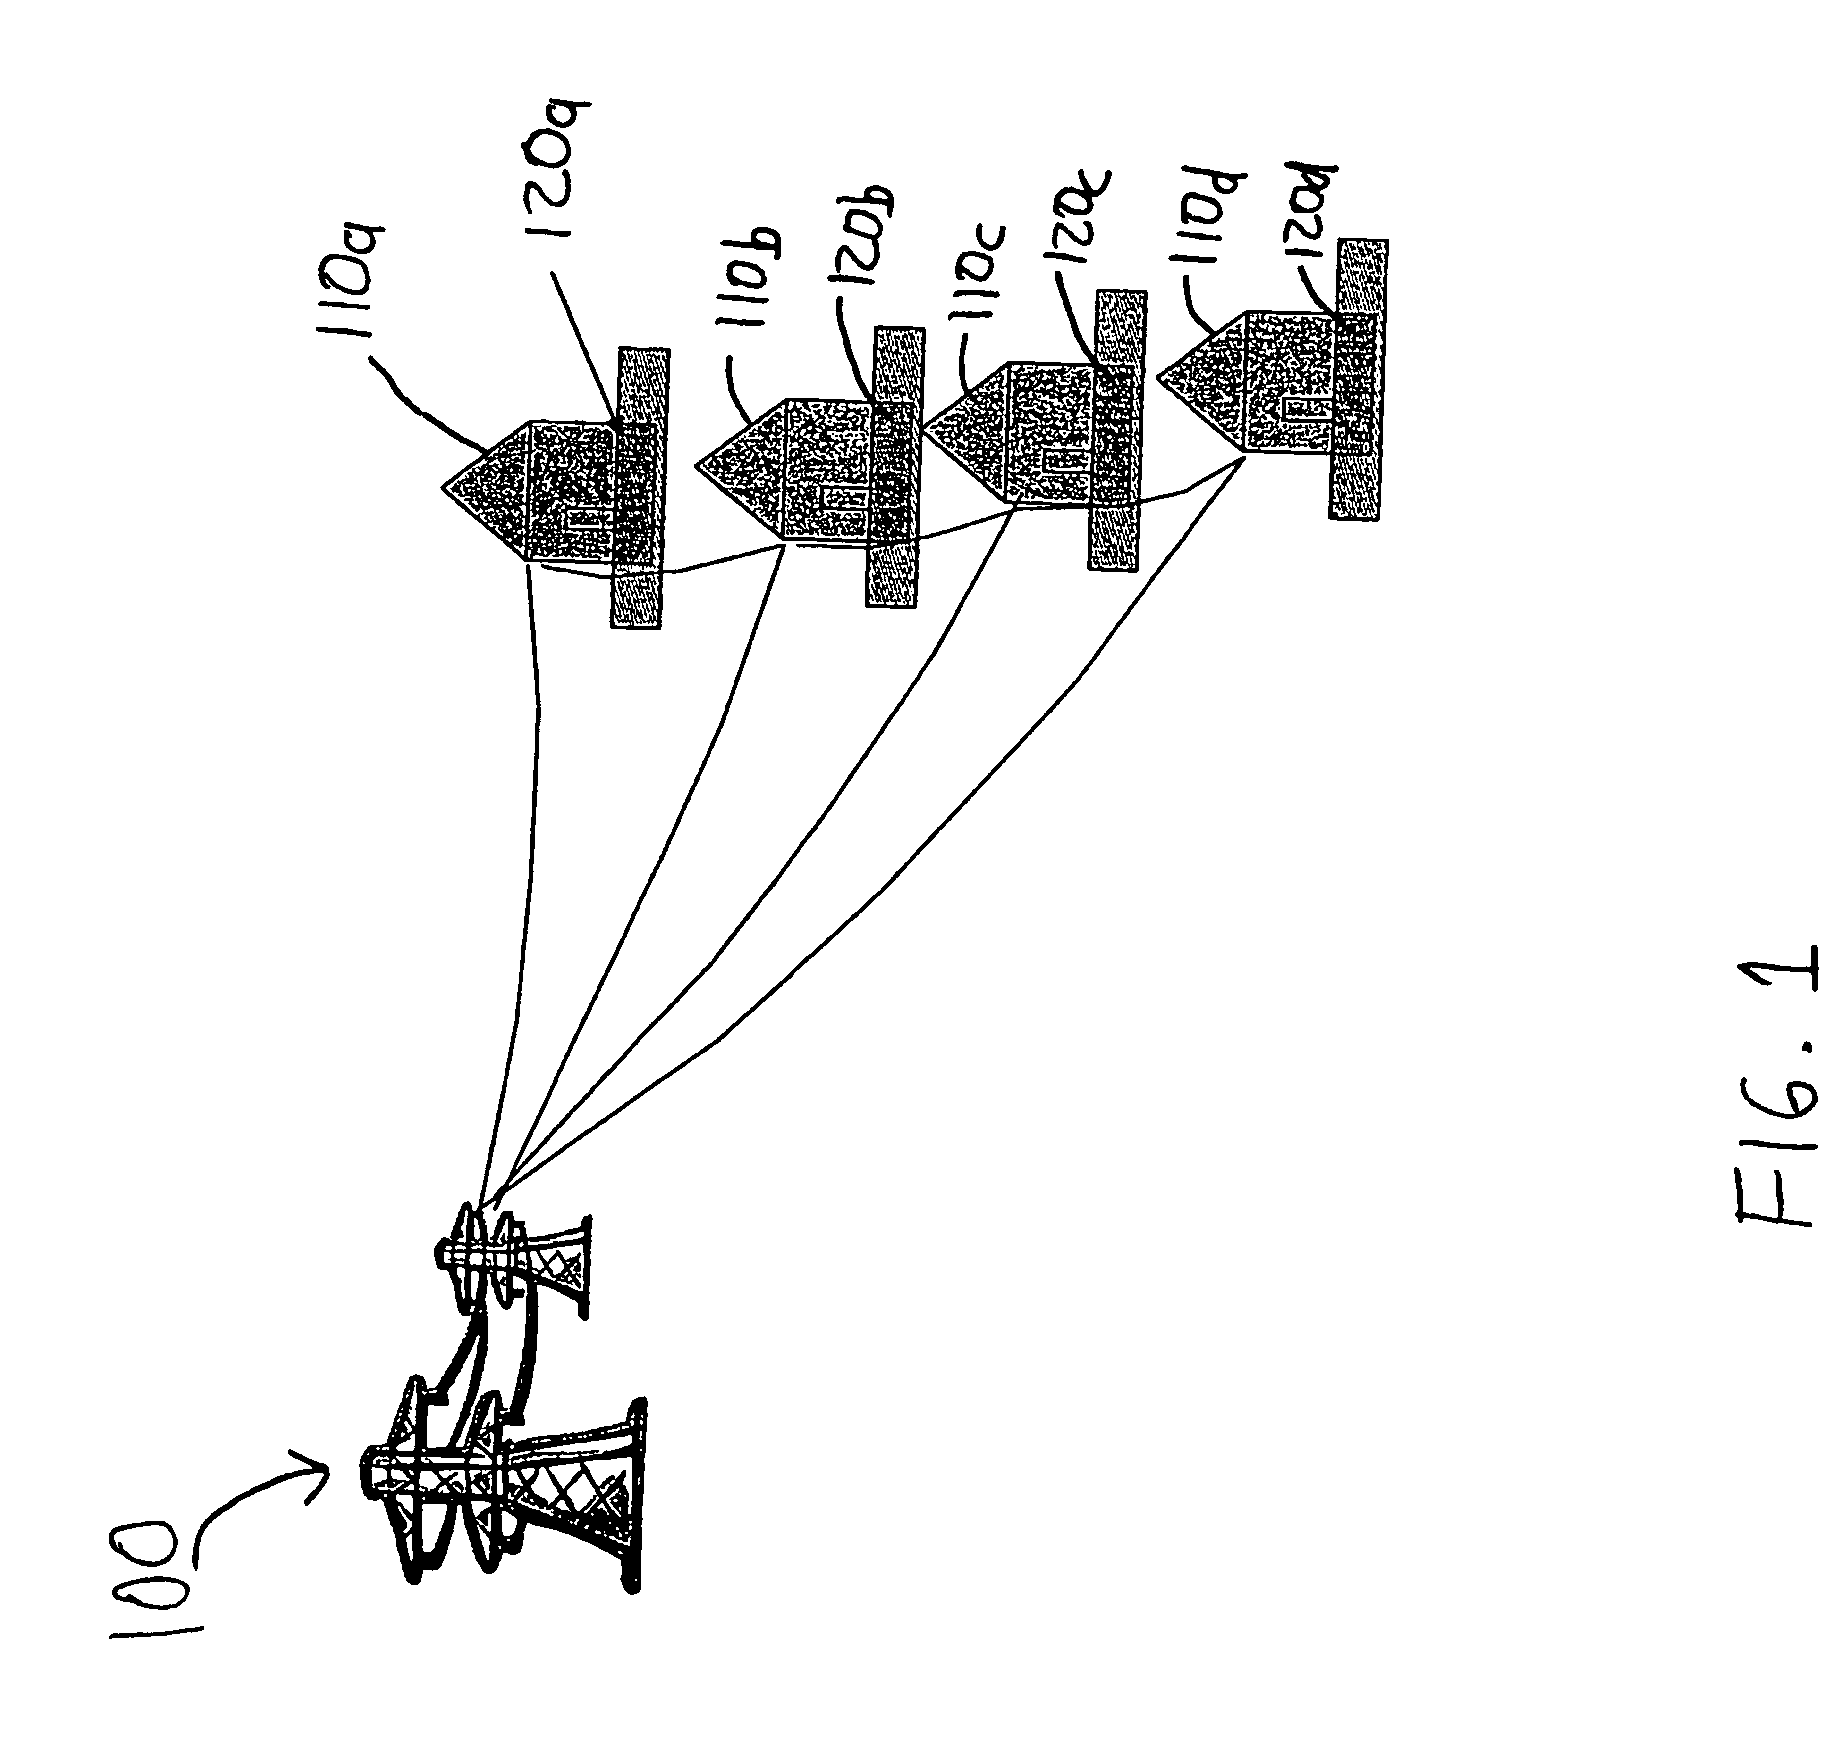 Consumer-sited power management system and method